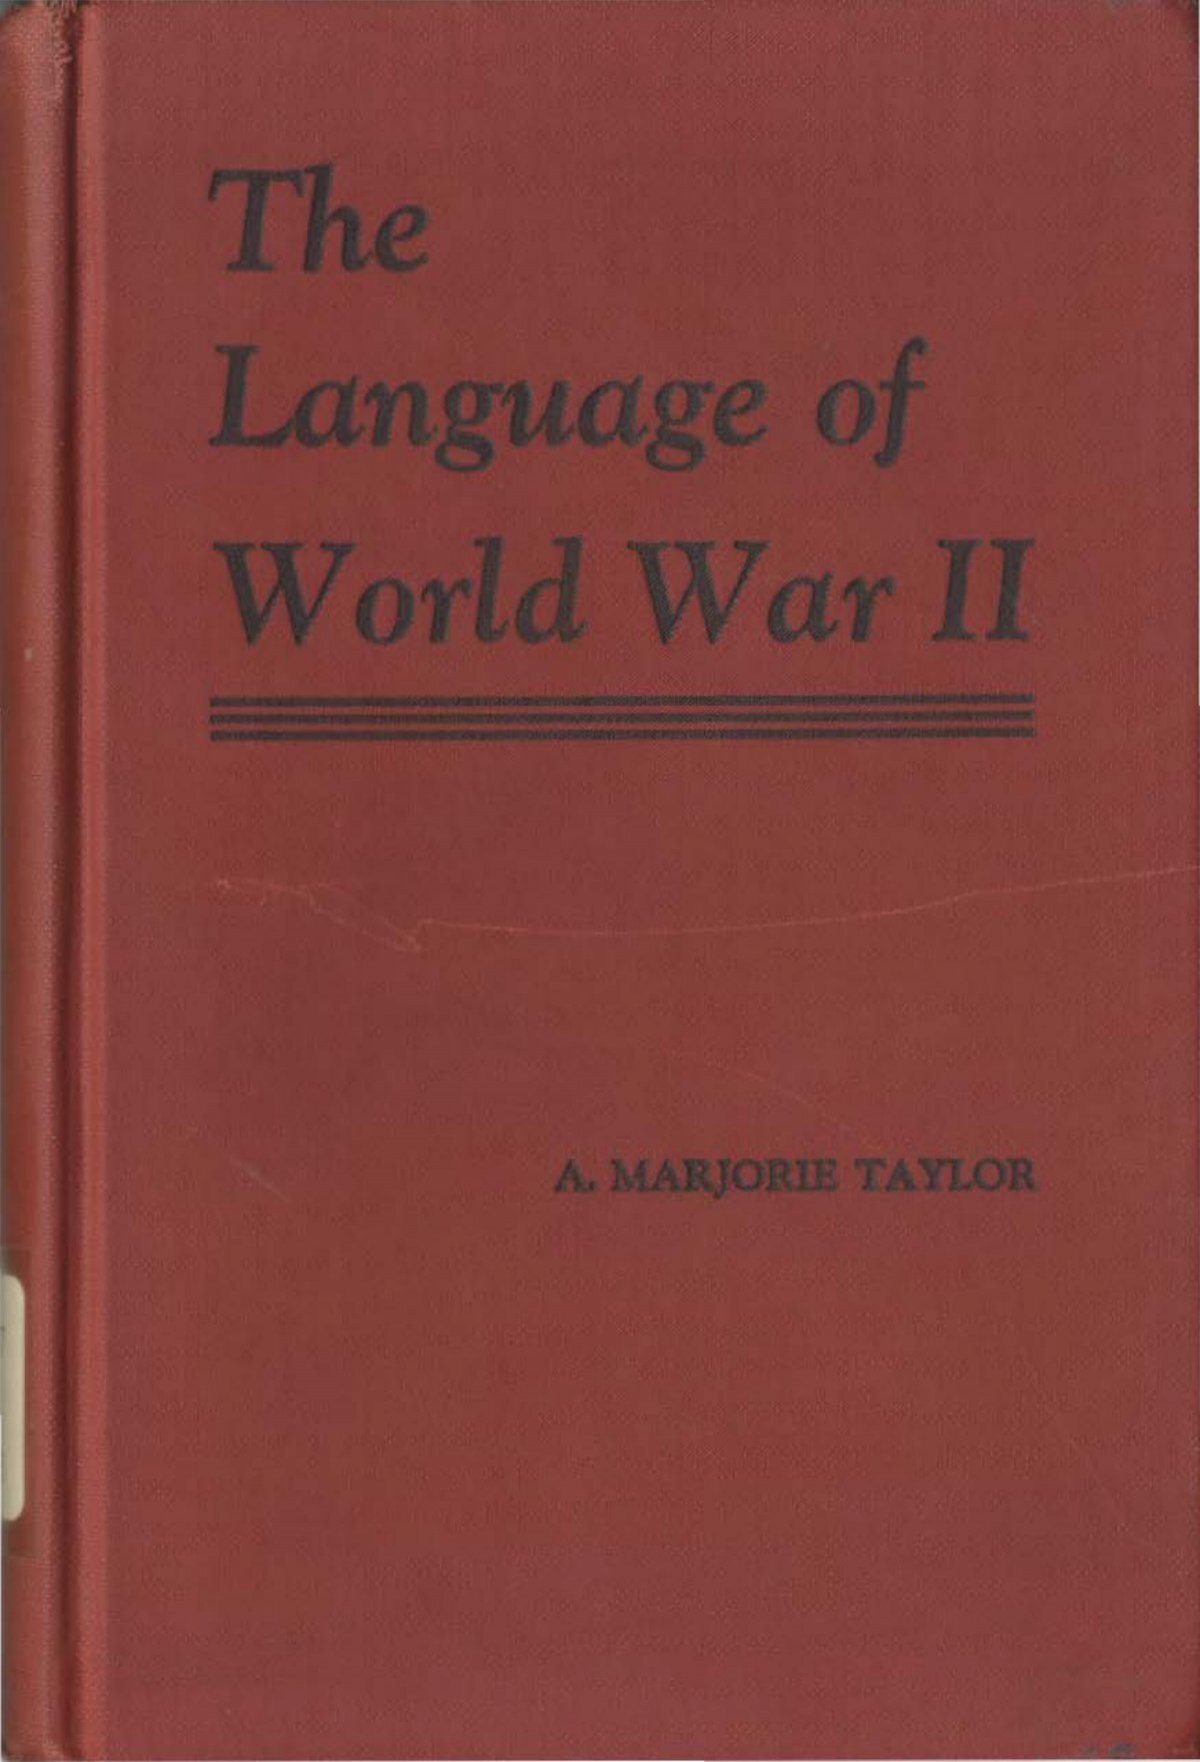 The Language of World War II: Abbreviations, Captions, Quotations, Slogans,  Titles, and other Terms